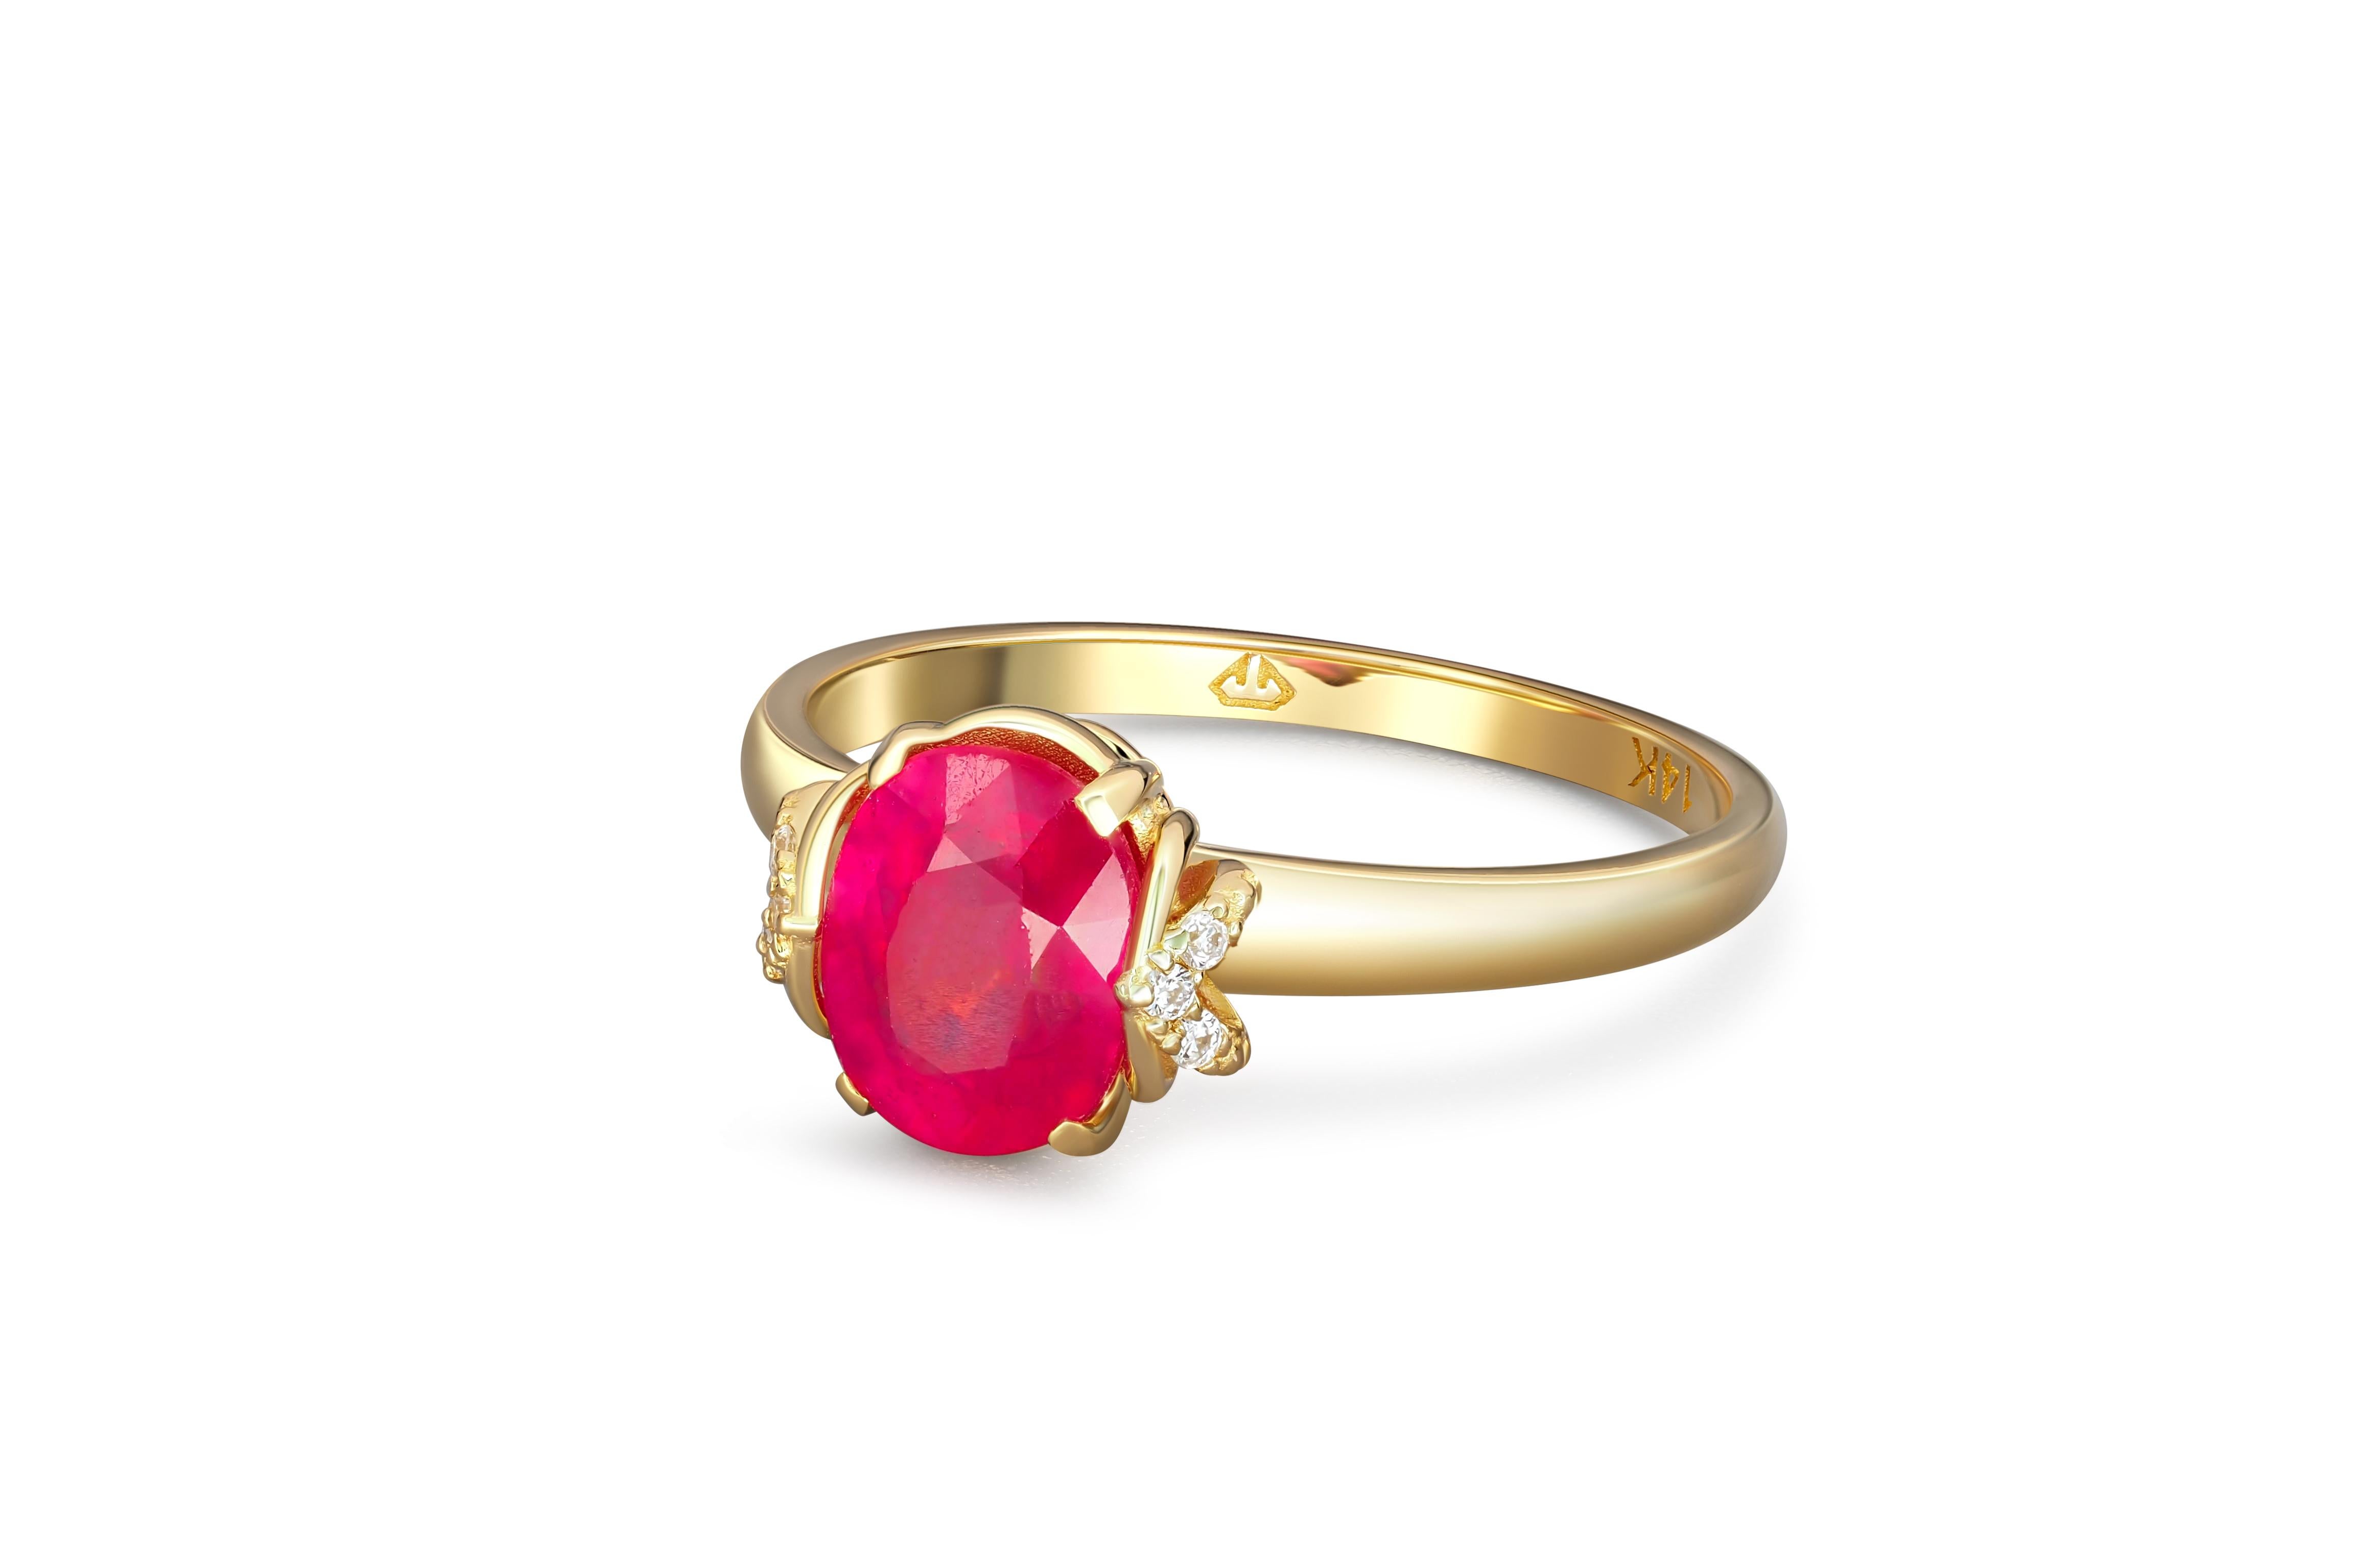 Ruby statement 14k gold ring. 
Oval ruby ring. July birthstone ring. Dainty ruby ring. Ruby engagement ring. Genuine ruby ring.

Metal: 14k gold
Weight: 2.4 g. depends from size.

Set with ruby, color - red
Oval cut, 1.4 ct. in total, 8x6